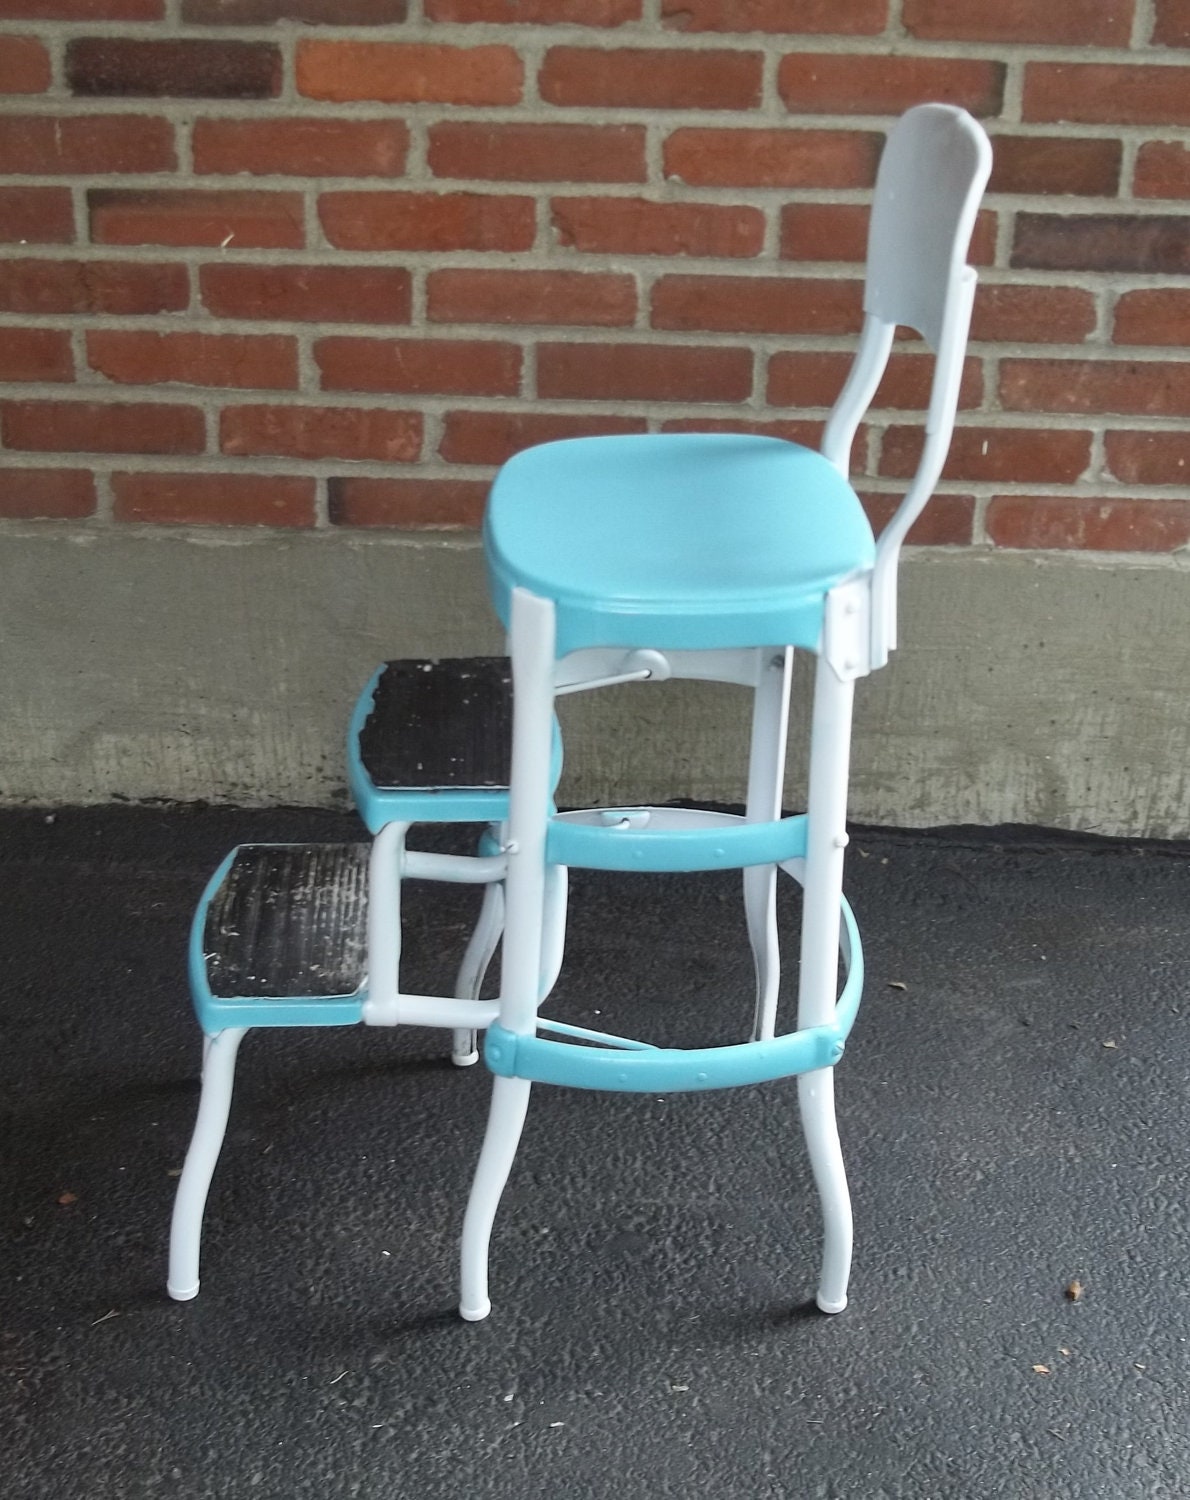 Vintage Metal Step Stool Chair / I have been looking for just the right